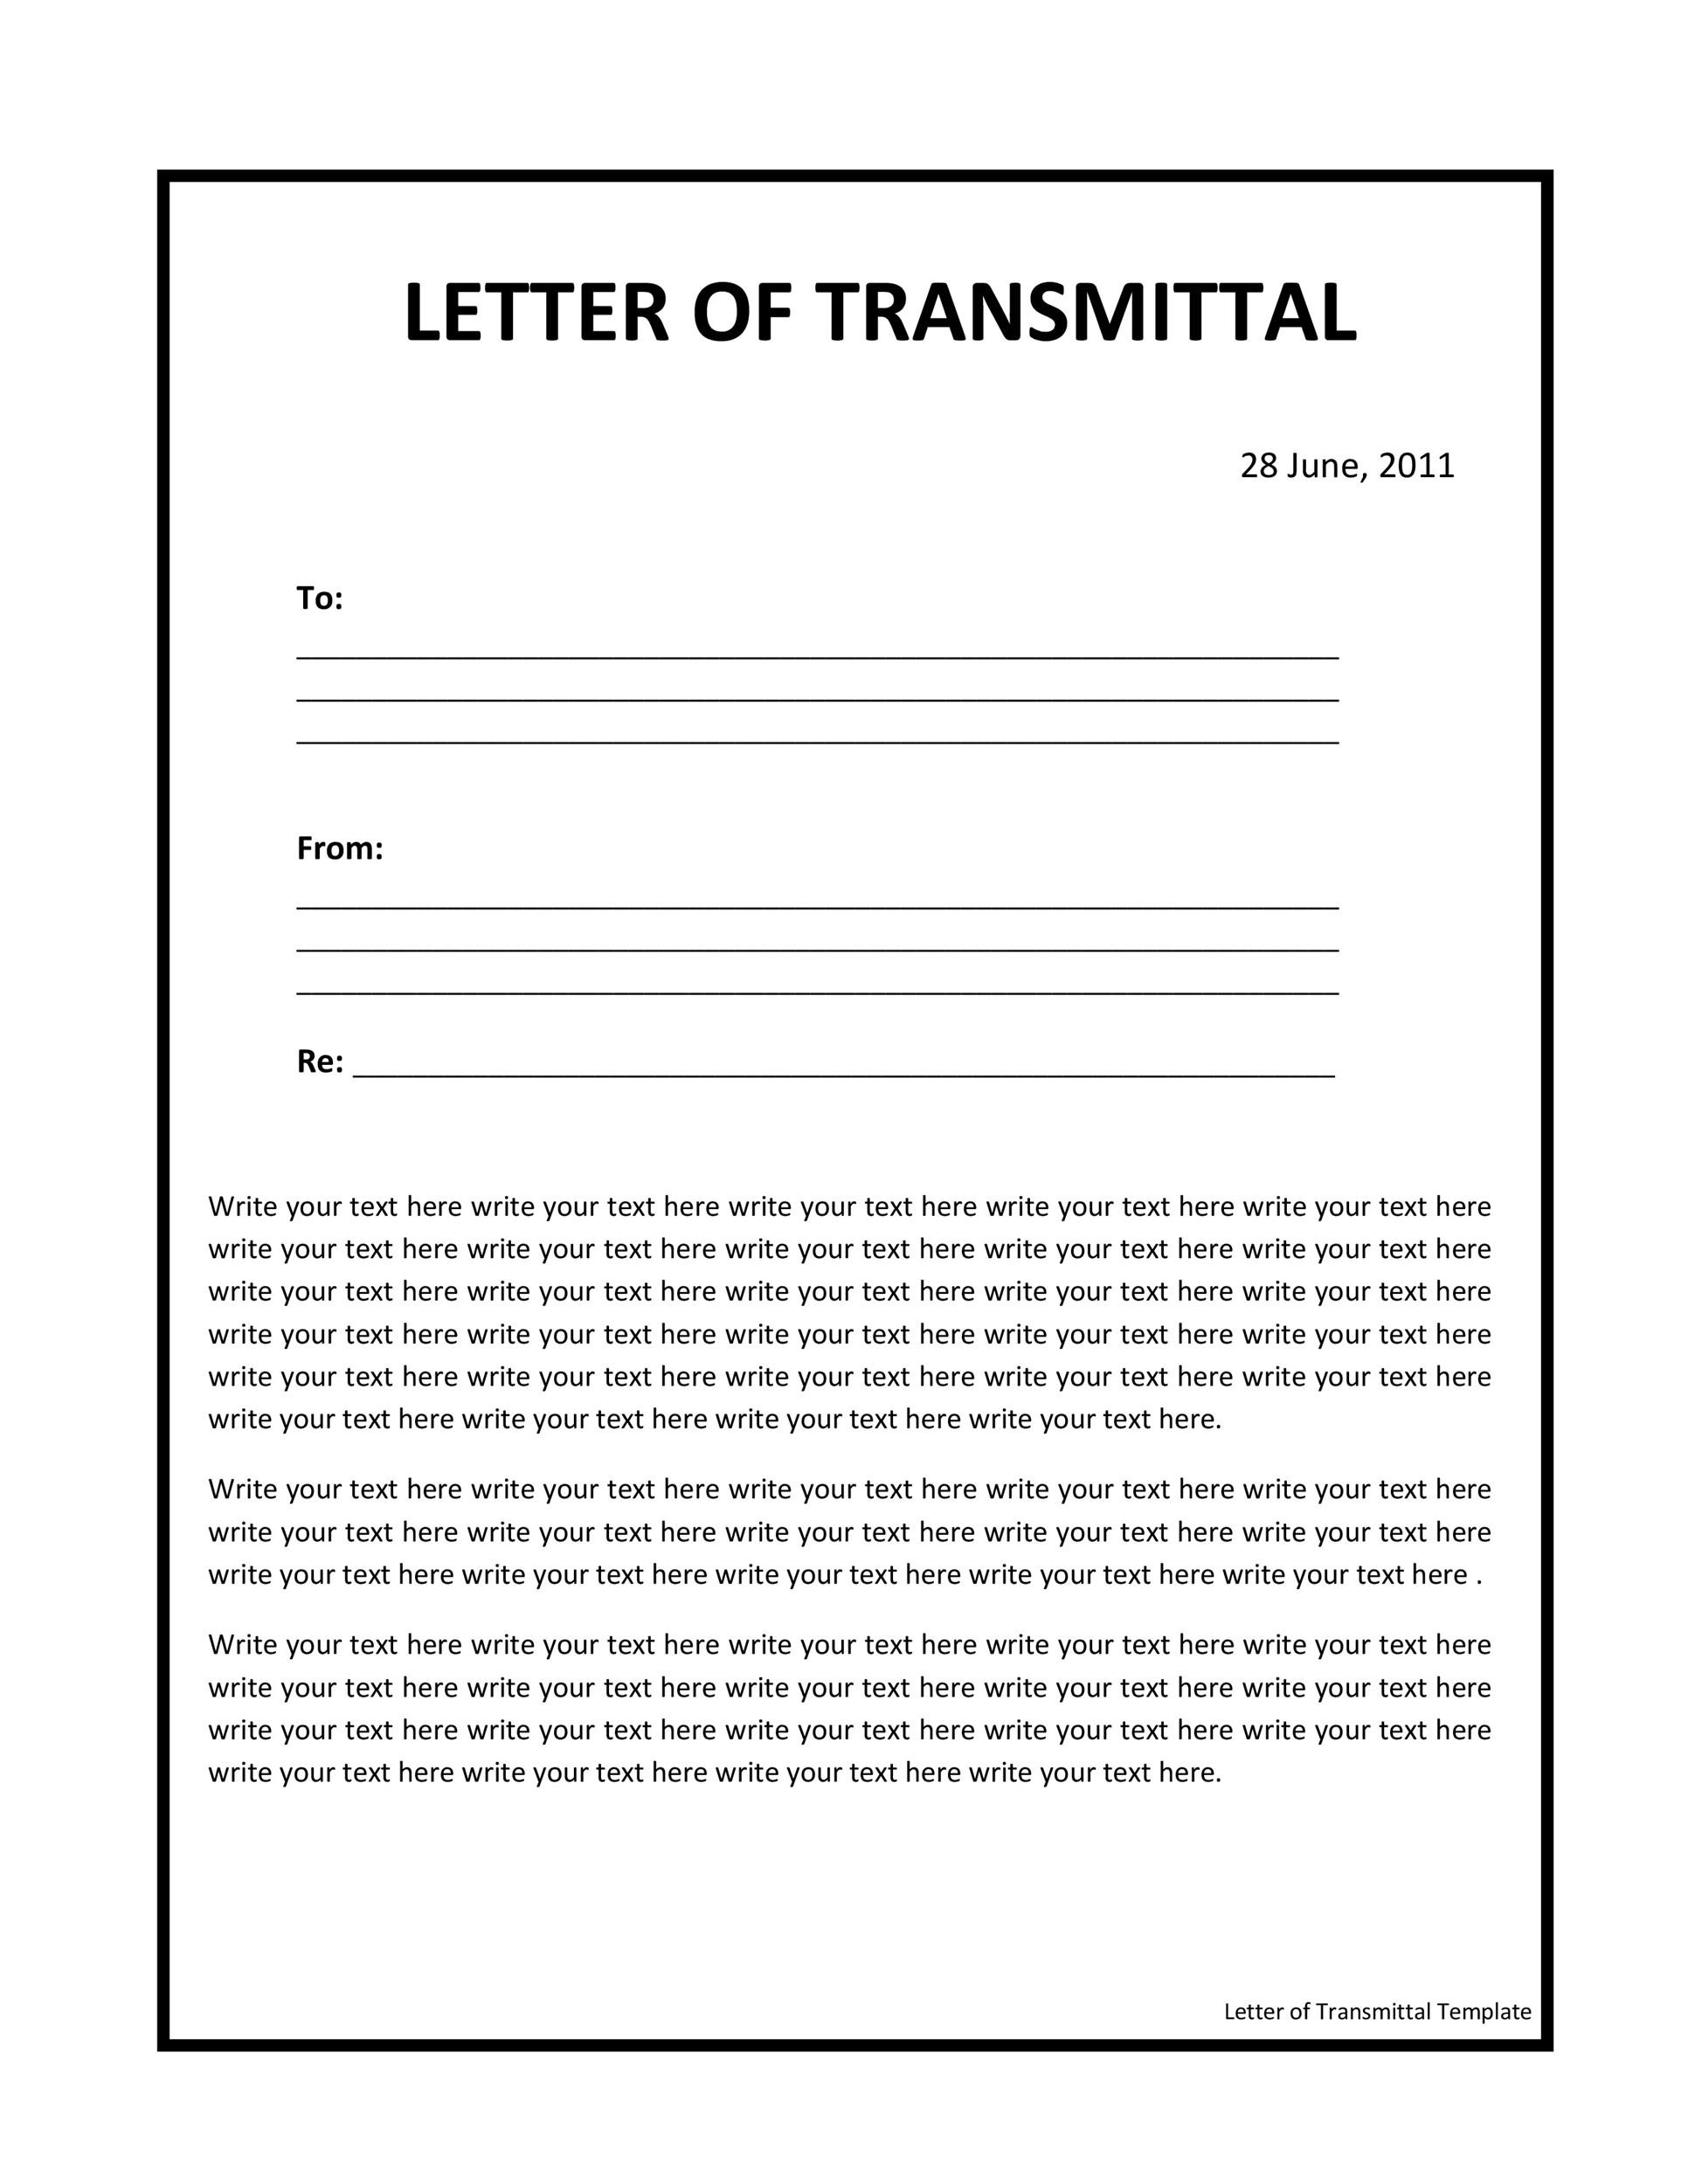 construction letter of transmittal template free download